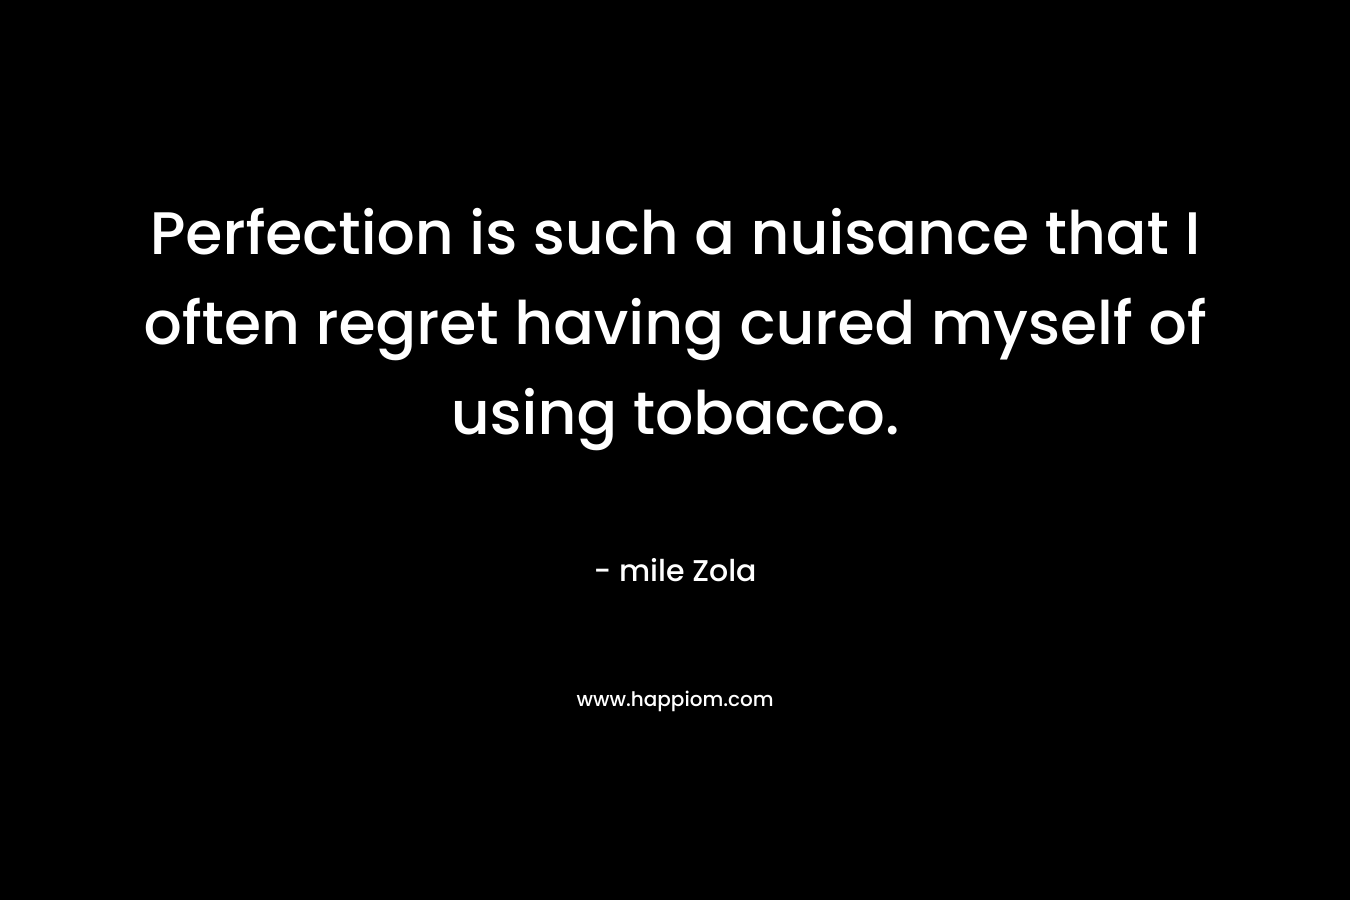 Perfection is such a nuisance that I often regret having cured myself of using tobacco. – mile Zola